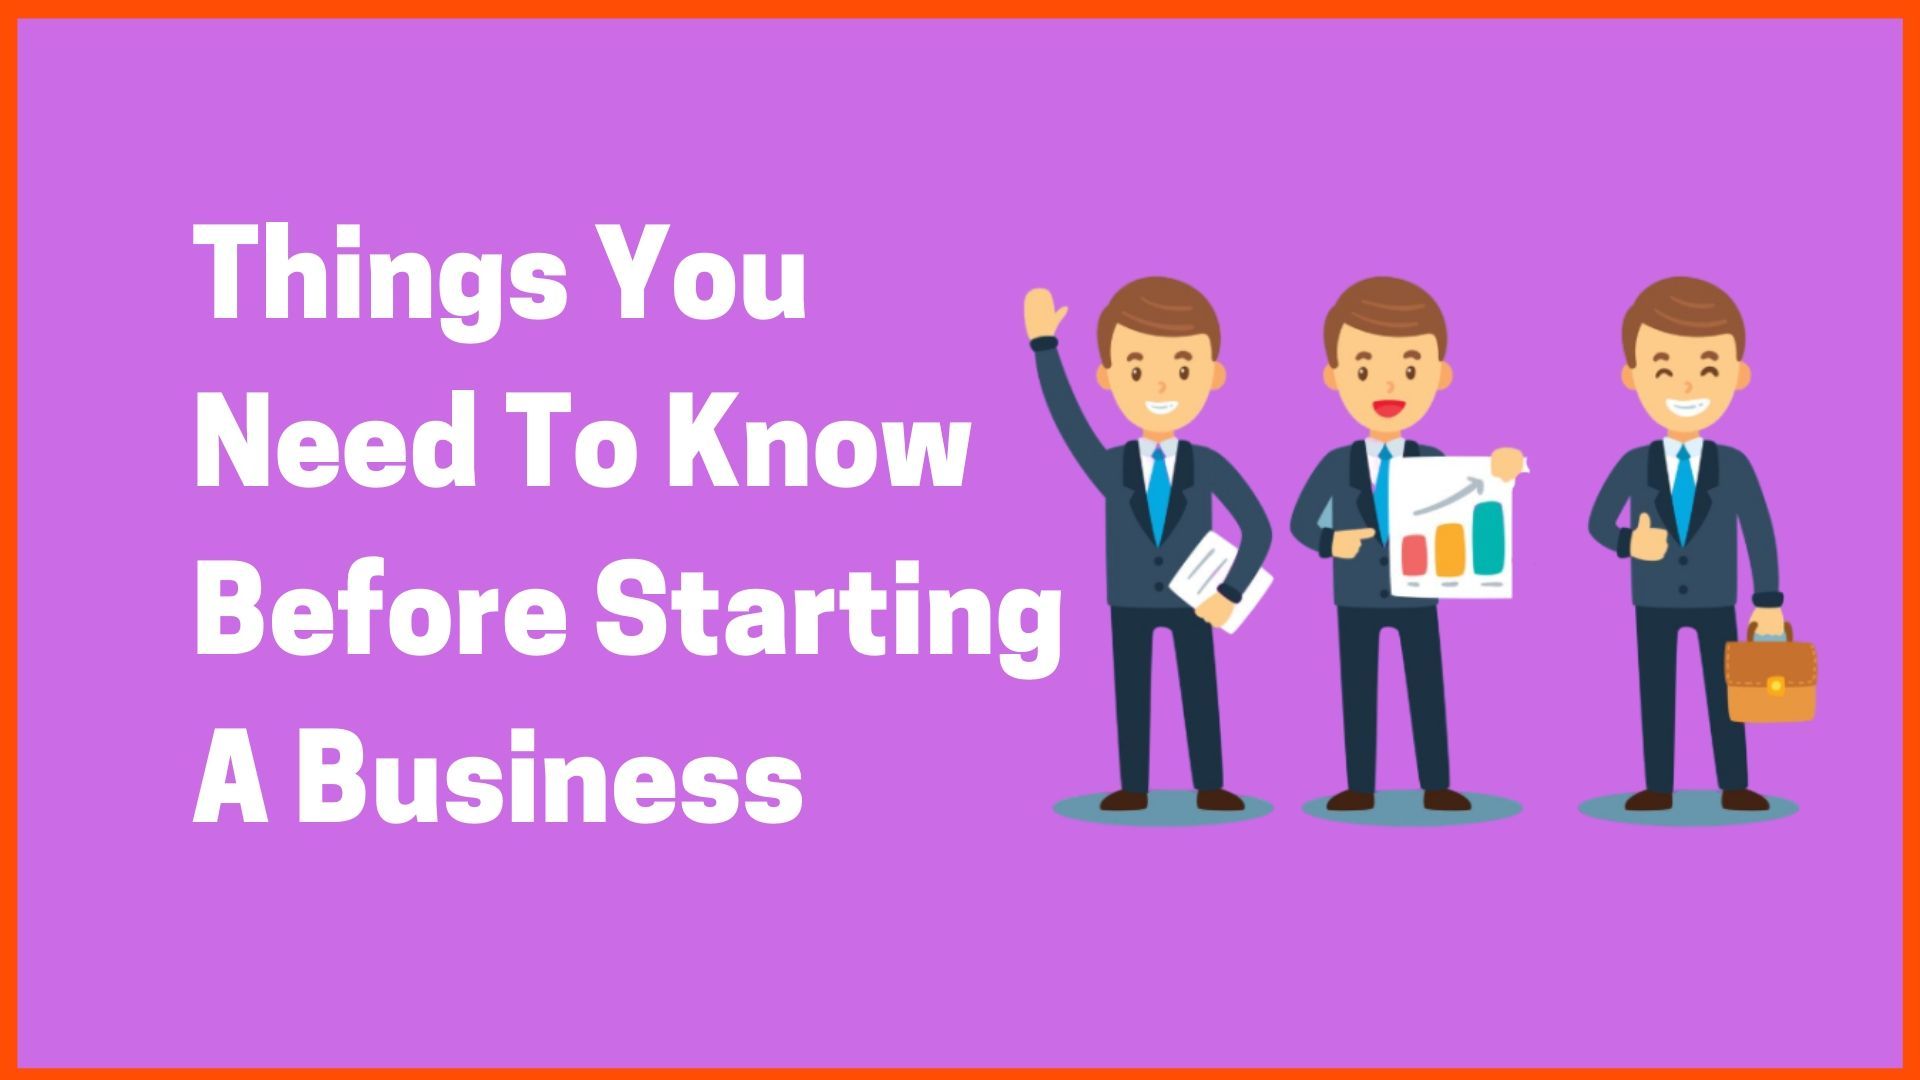 Things You Need to Know Before Starting a Business